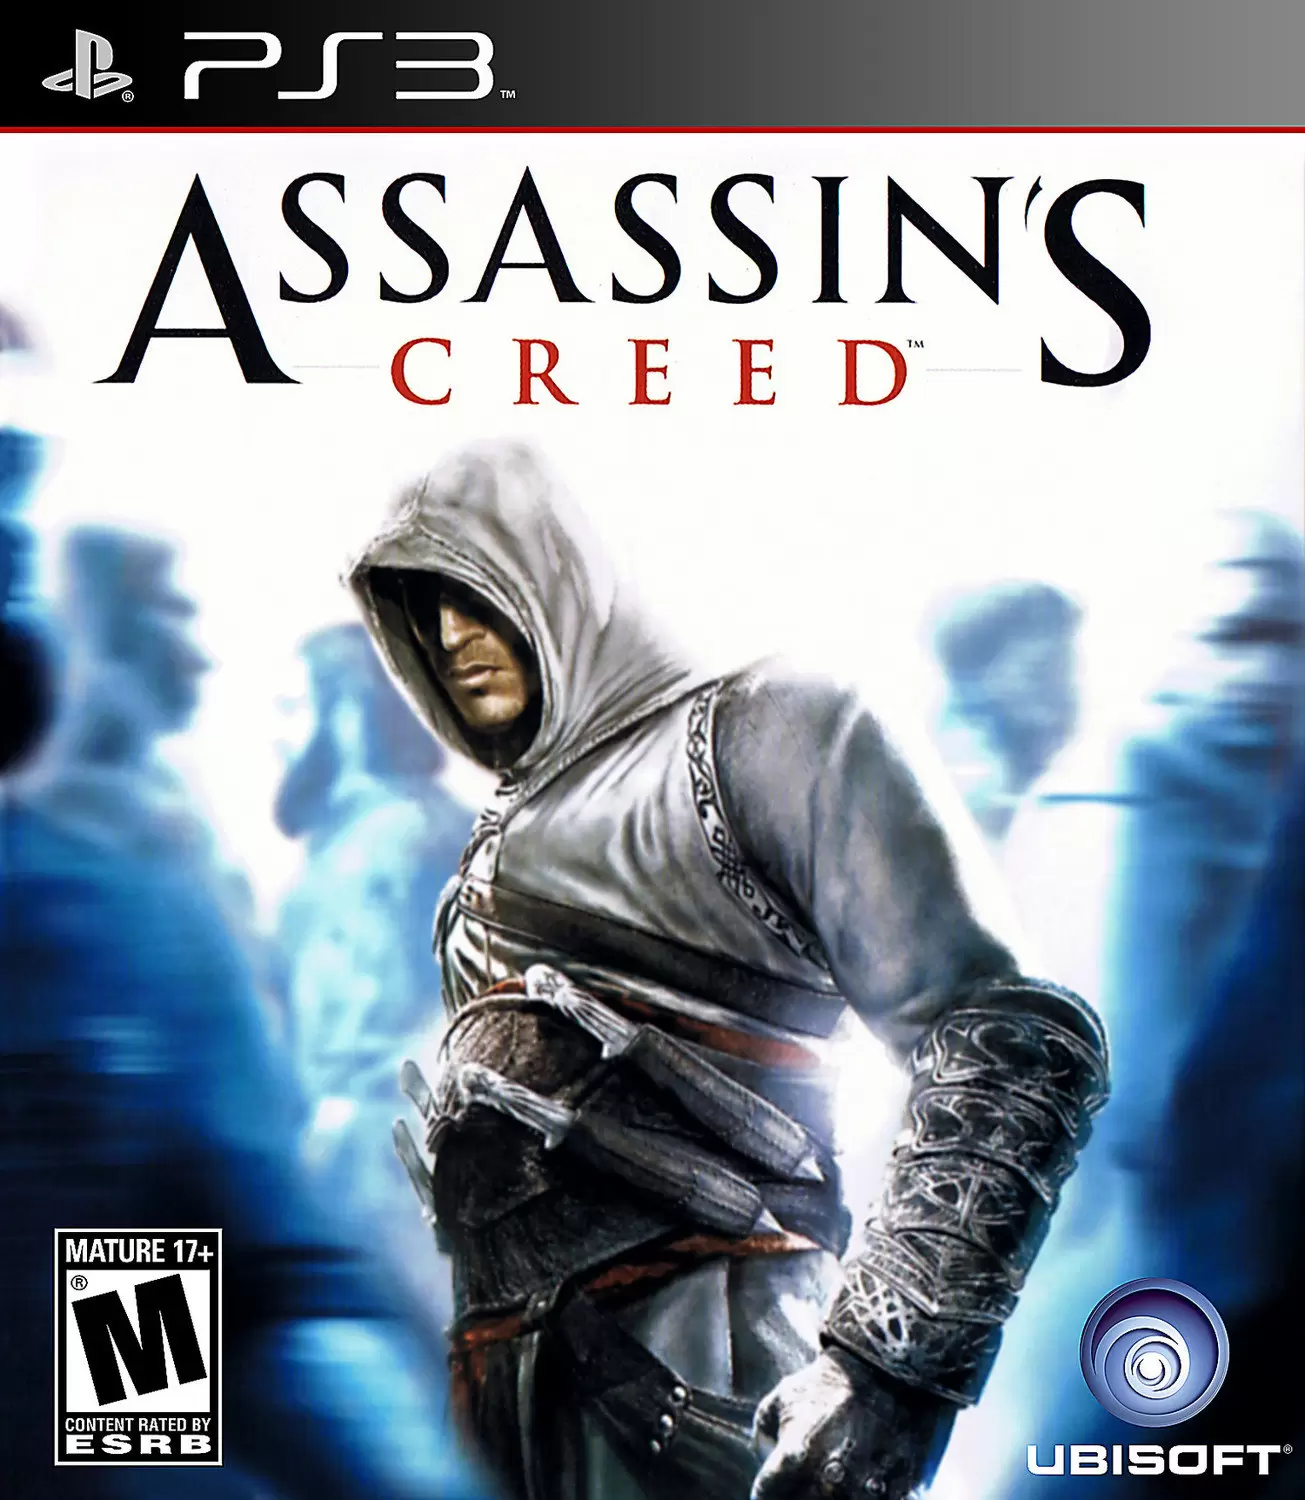 Assassin's Creed: Ezio Trilogy - PlayStation 3, PlayStation 3